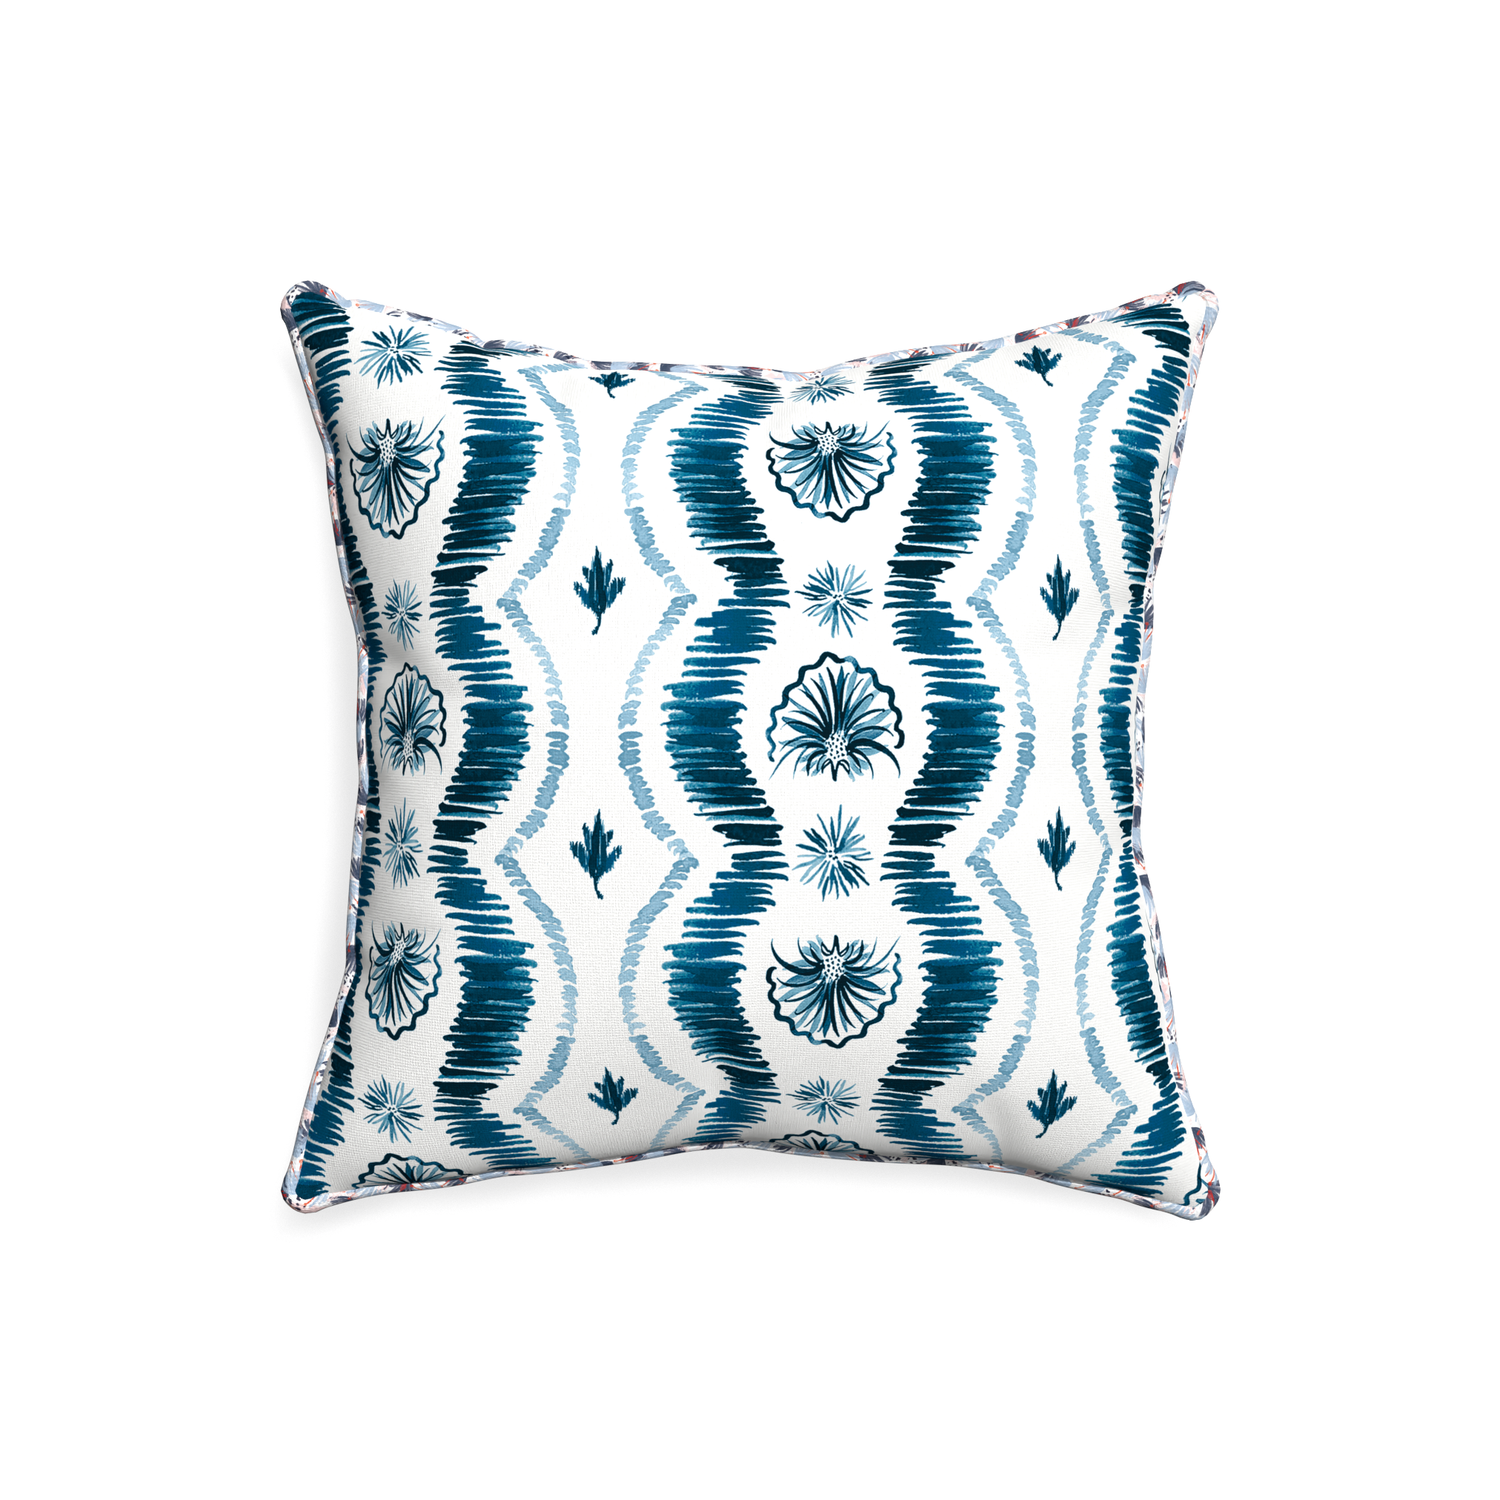 20-square alice custom blue ikatpillow with e piping on white background